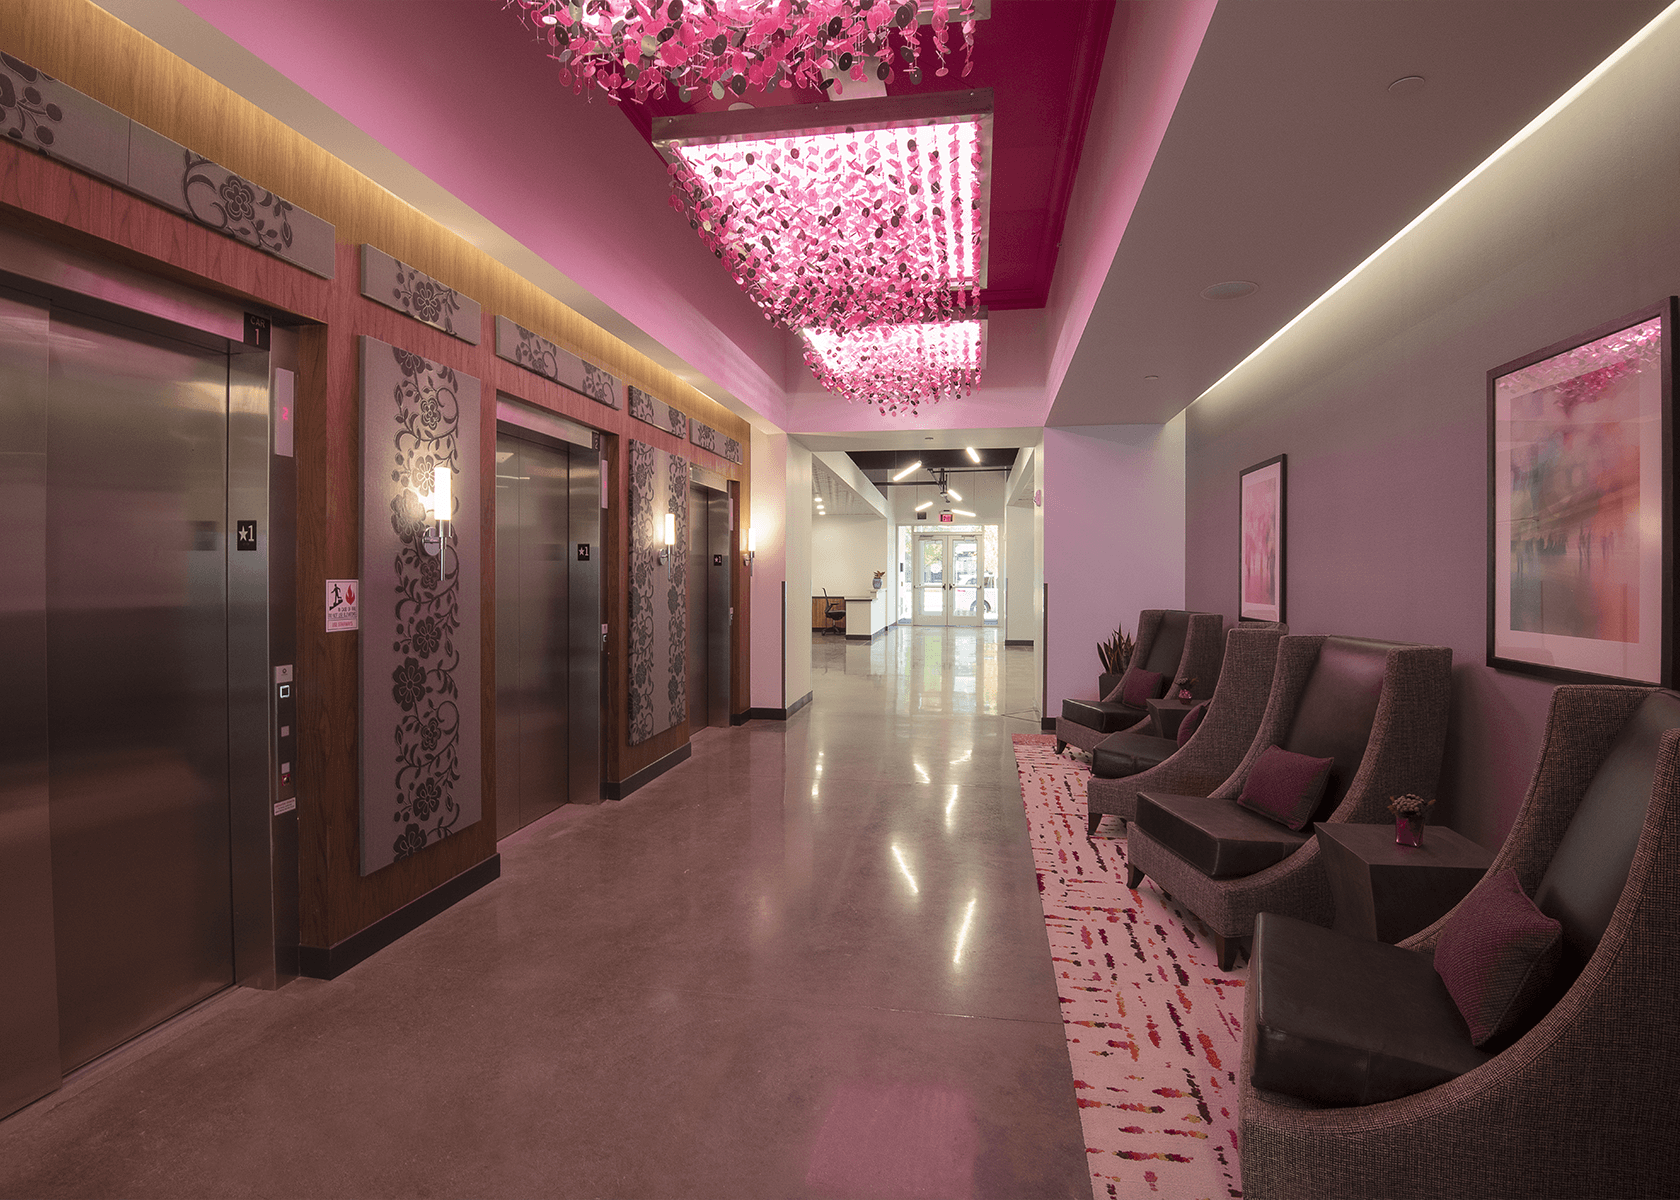 Hallway with chairs and and pink lighting